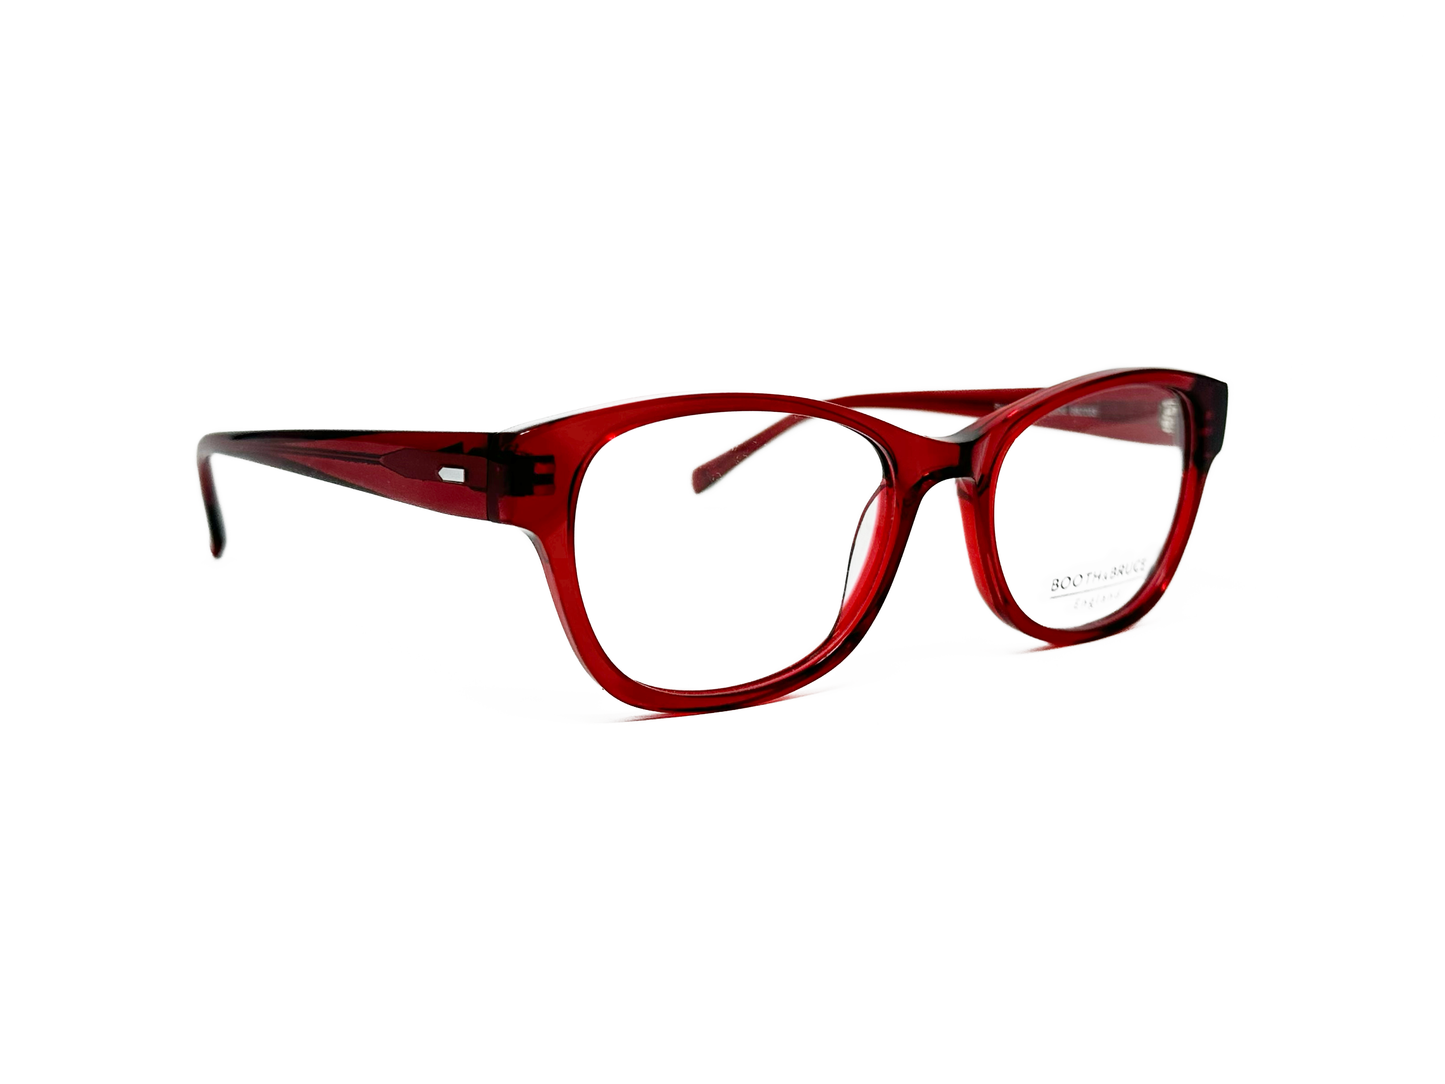 Booth & Bruce upswept, rectangular, acetate optical glasses with rounded lenses. Model: BB2203. Color: Merlot. Side view.